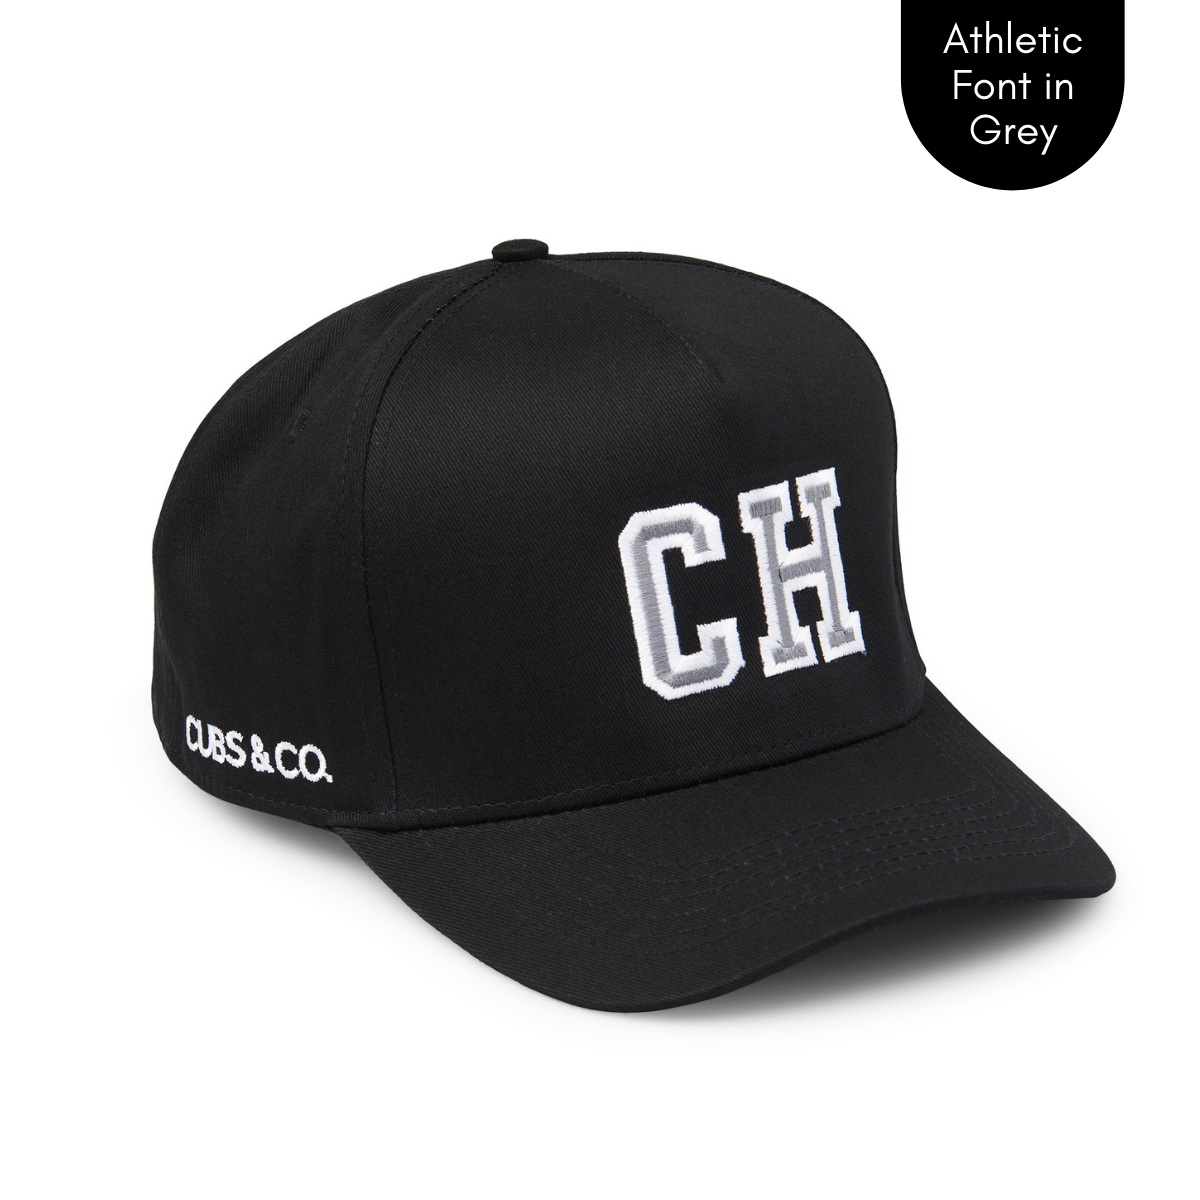 Cubs & Co - PERSONALISED BLACK W/ INITIALS | ATHLETIC GREY PRINT